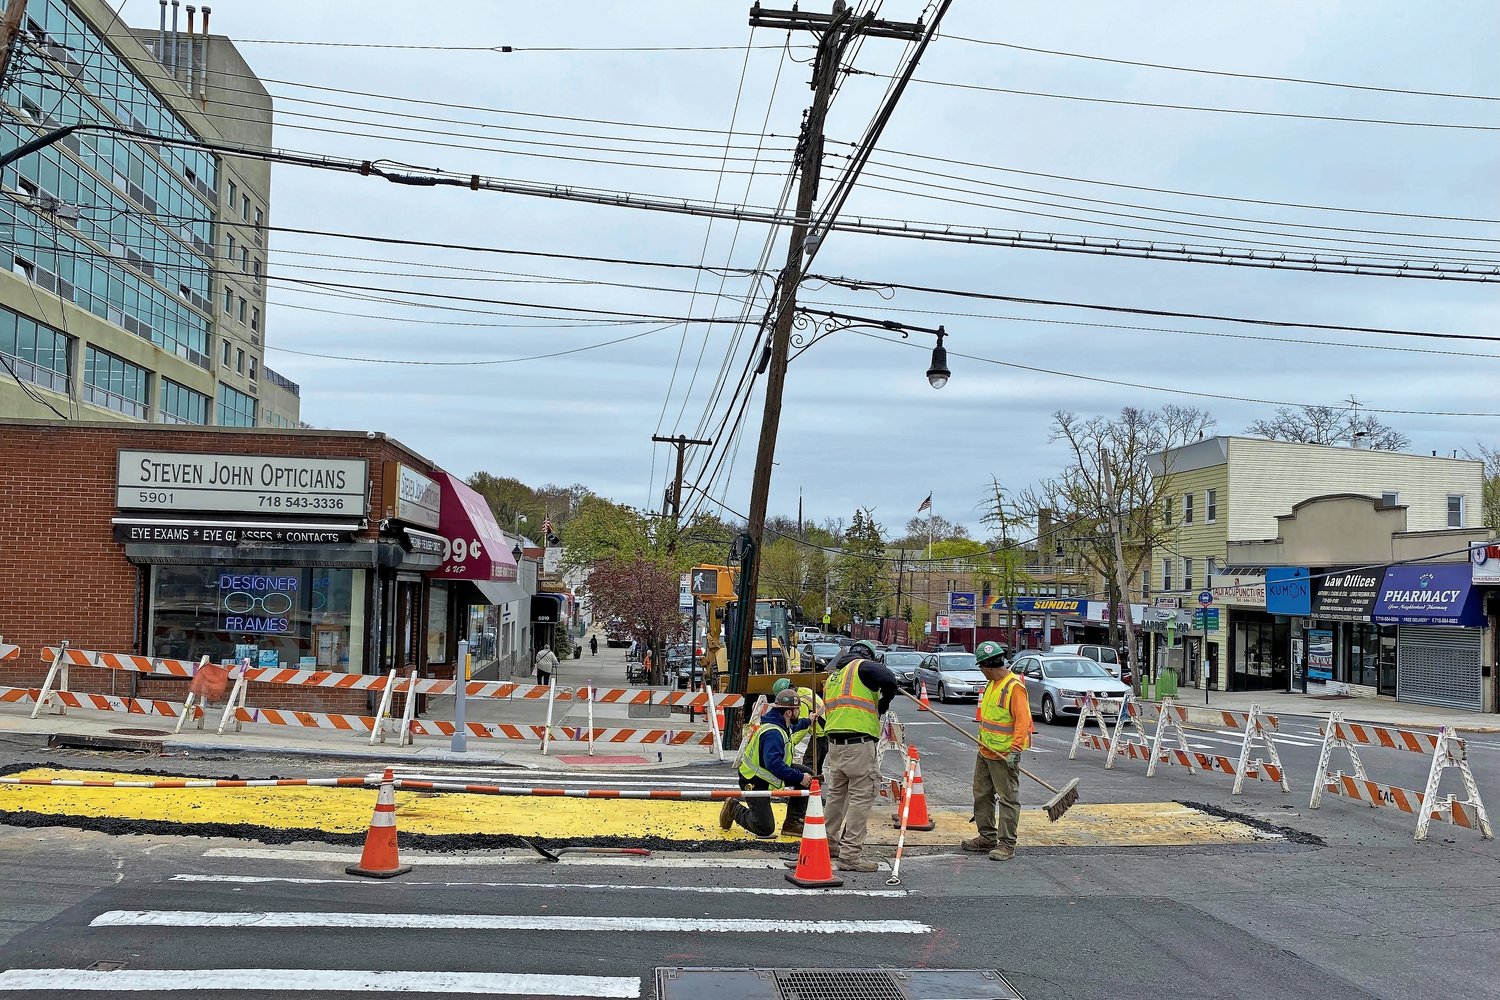 Workers finish making repairs to underground utilities on 259th Street at the intersection of Riverdale Avenue on April 25. They placed steel plates at two sections of the intersection over a couple of days. With construction vehicles still parked nearby, it seems their work is not yet done.